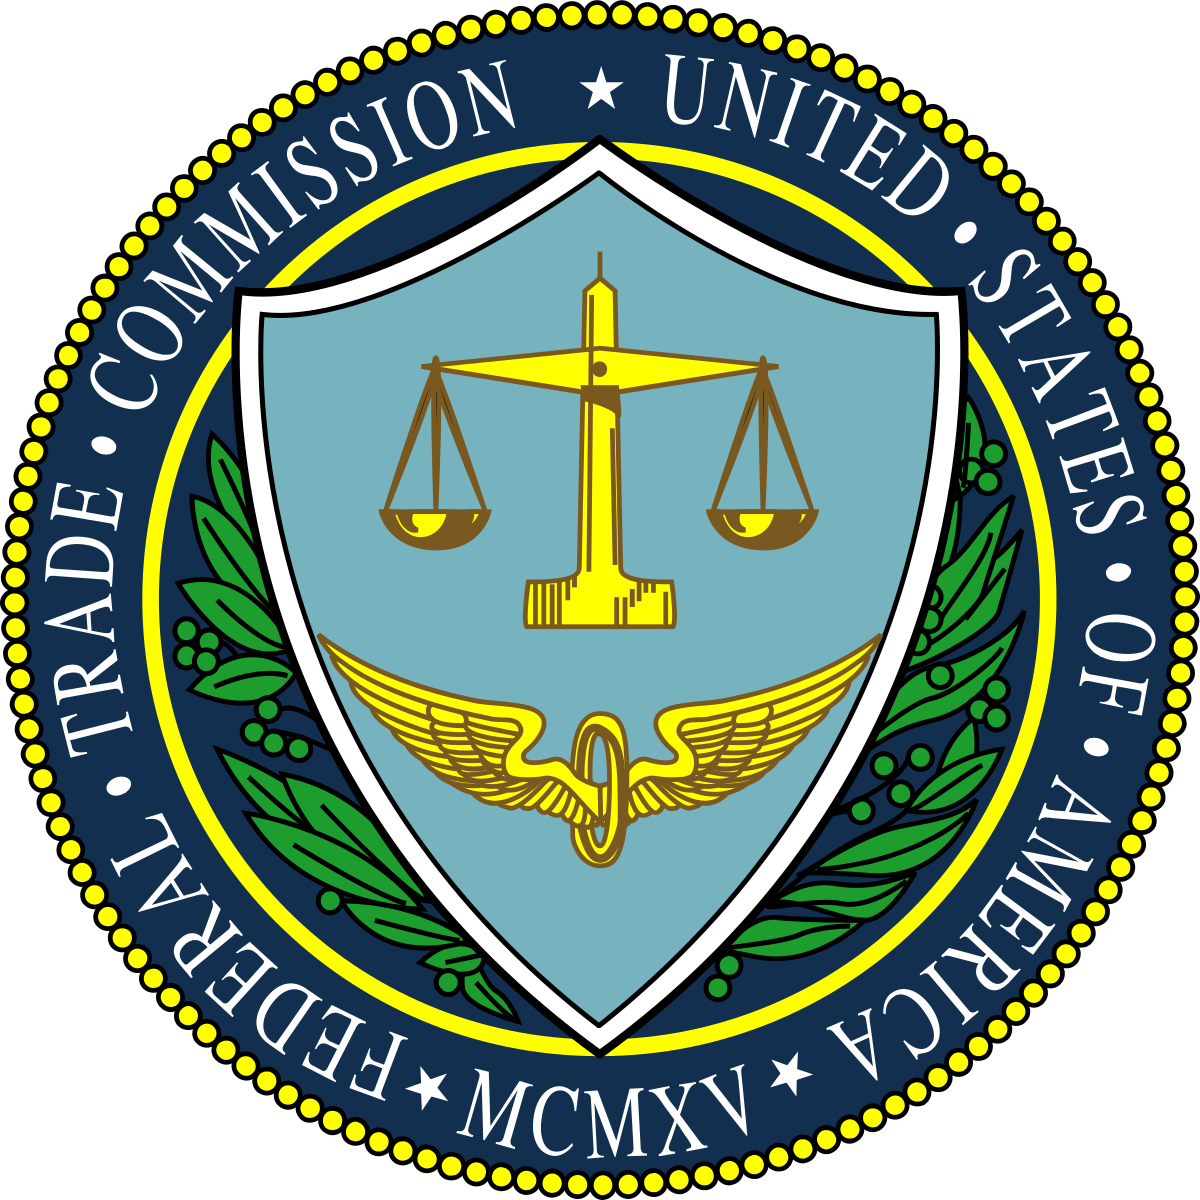 The Federal Trade Commission (FTC) has charged 11 companies and three individuals with running a mortgage loan modification operation that deceived homeowners with phony promises of preventing foreclosure and achieving mortgage affordability